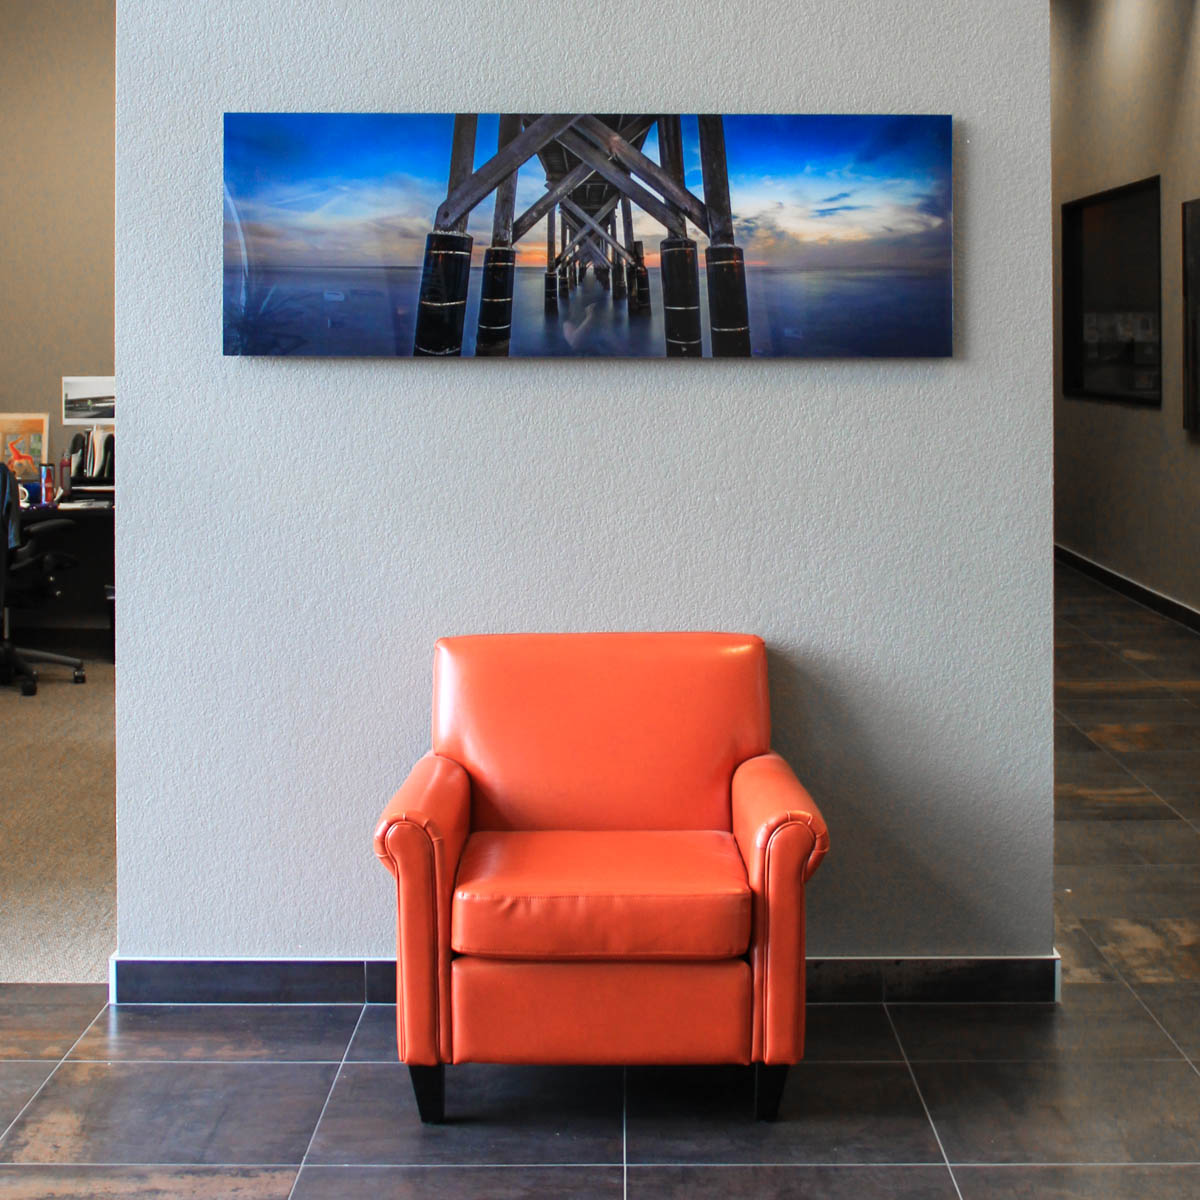 Face Mounted Plexiglass Acrylic Print Over Office Chair